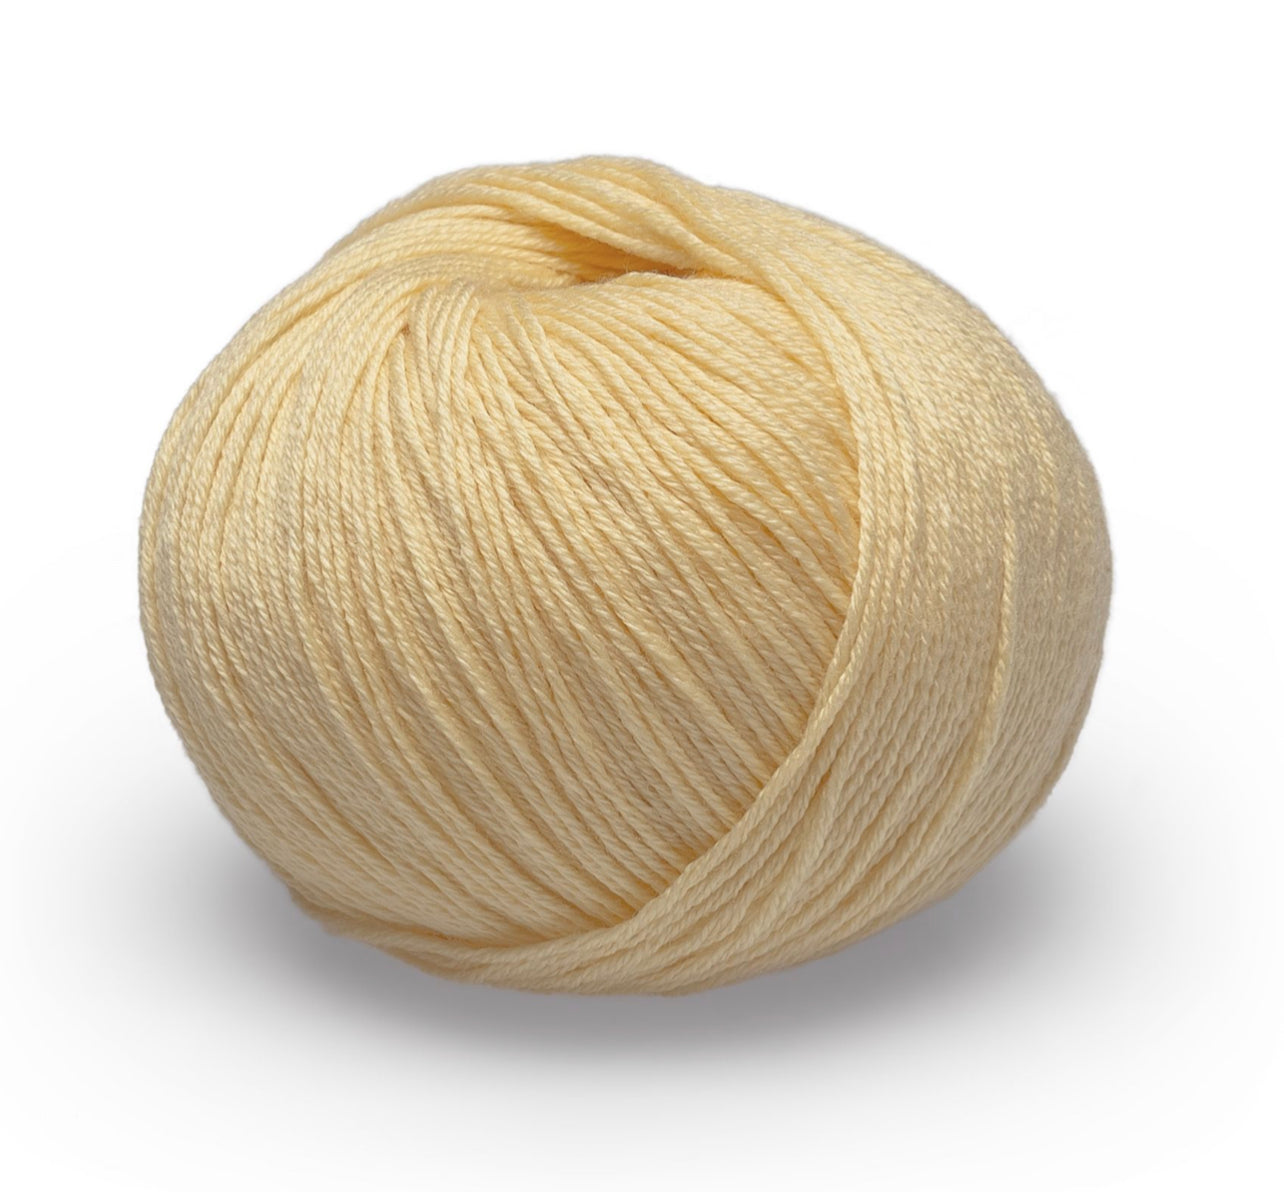 This gorgeous Glencoul DK yarn is ideal for all seasons! It has the beautiful feel and sheen of cotton but the durability of wool, making it ideal for garments to wear all year round.  70% Merino/ 30% Cotton  DK/8 ply weight  116m (126 yards)  50 gms  Needle size: 4mm   Cold machine wash, do not iron or tumble dry